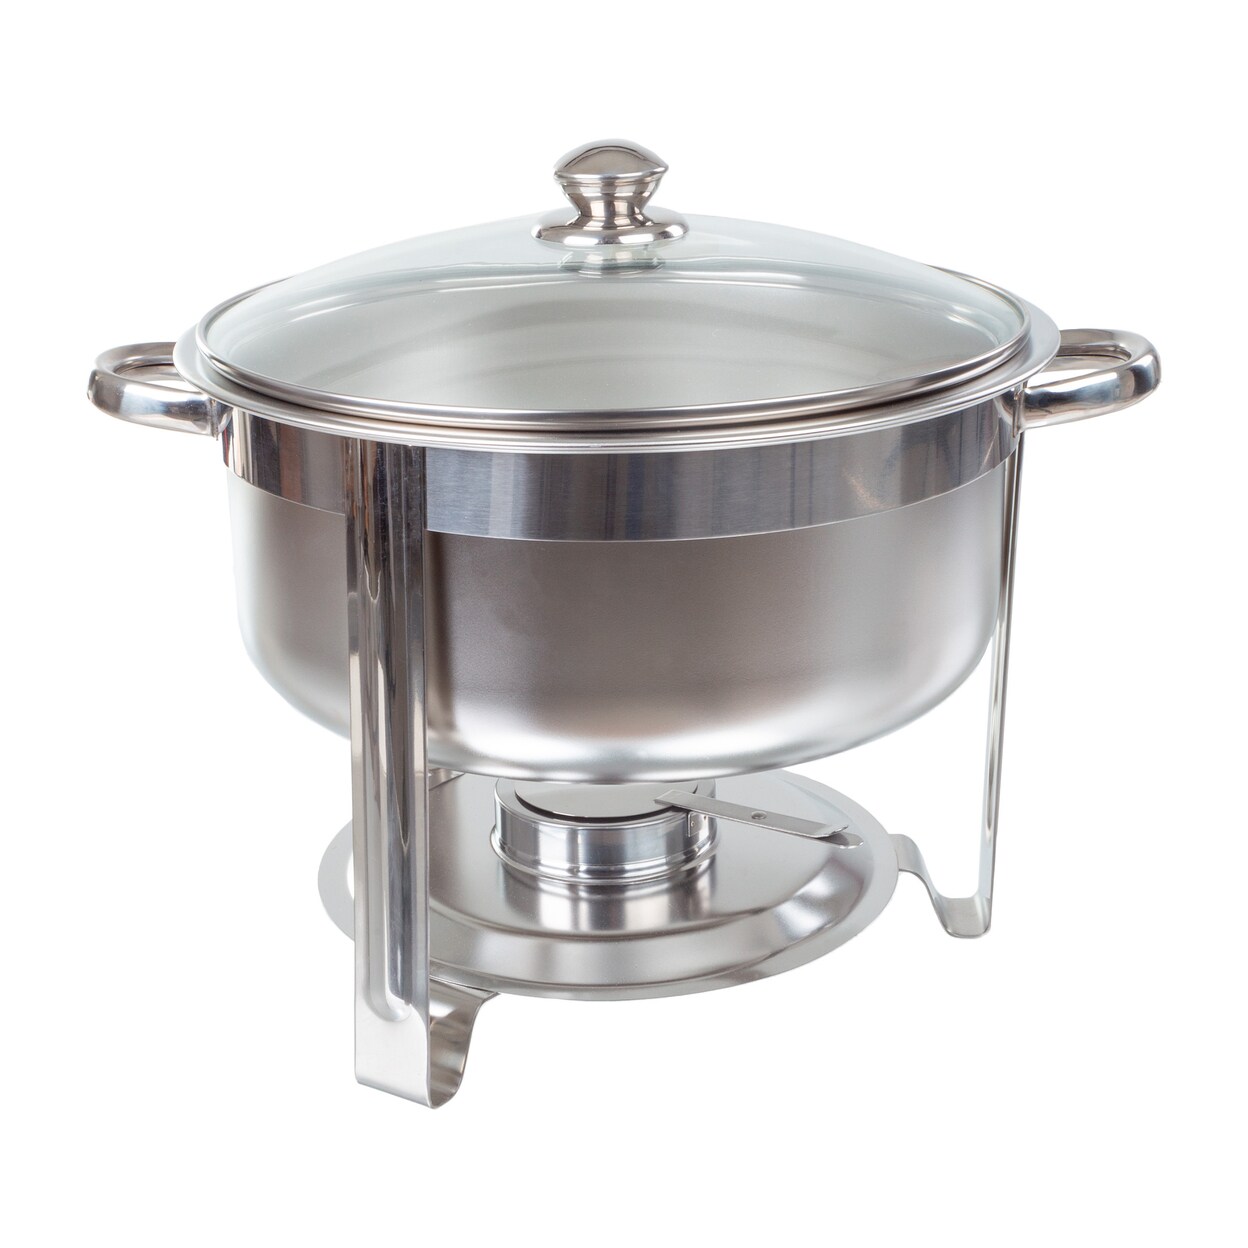 Classic Cuisine Round 7.5 QT Chafing Dish Buffet Set Food Warmers for Parties Stainless Steel